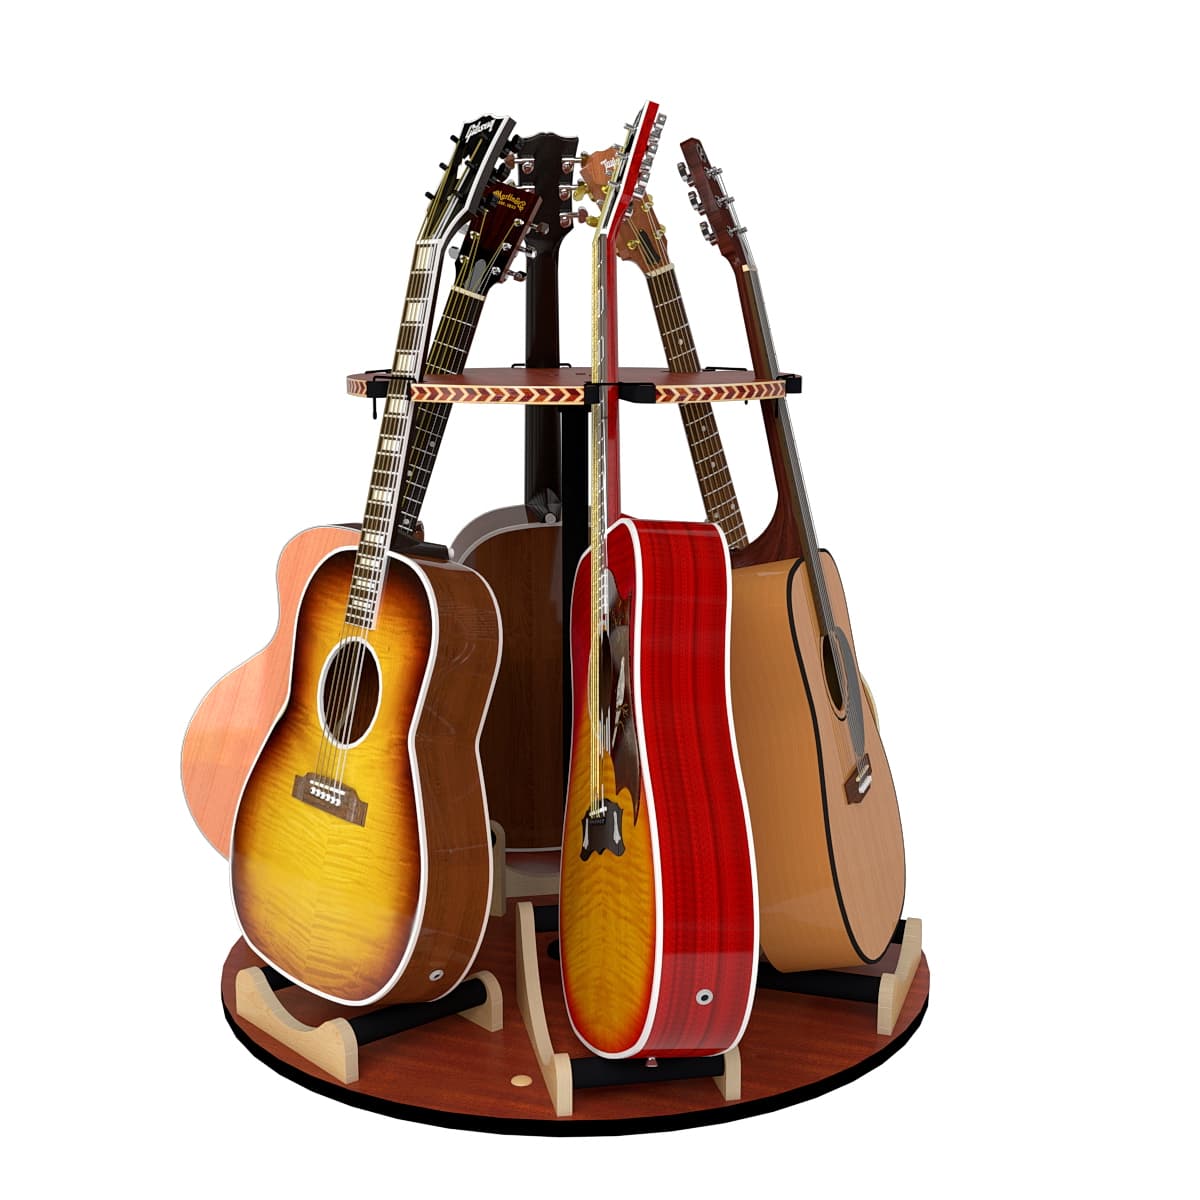 Carousel Deluxe Multi-Guitar Stand Guitars on Main